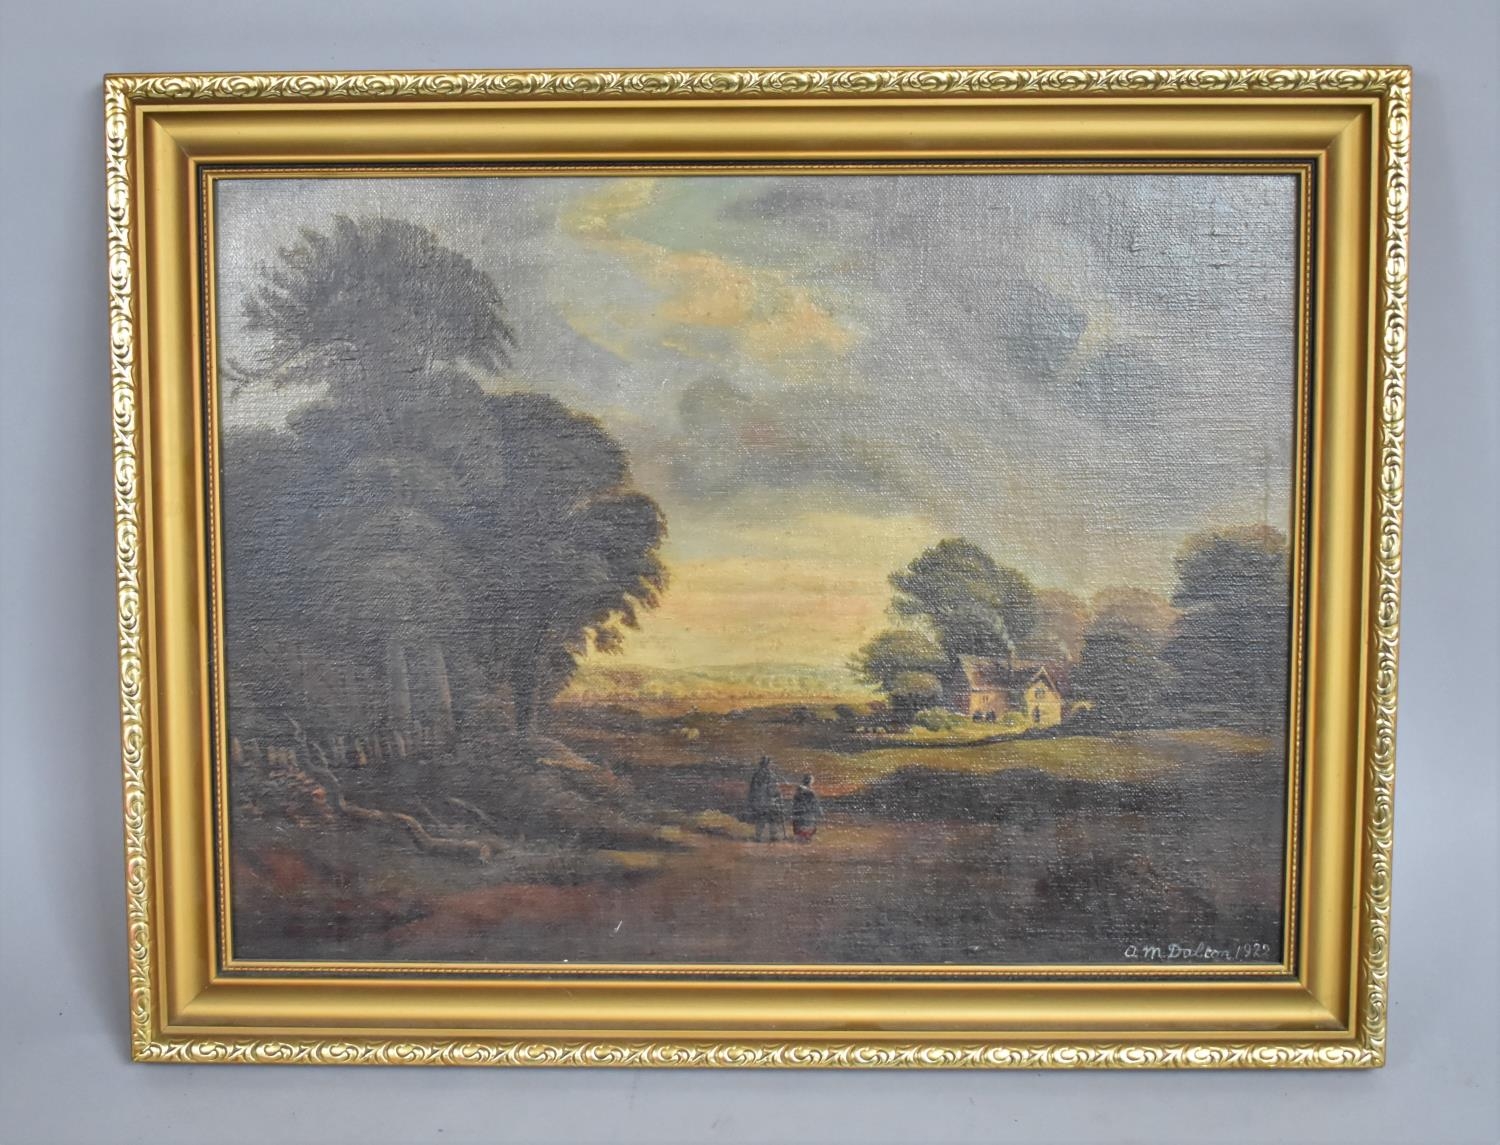 A Gilt Framed Oil on Board Depicting Figures and Thatched Cottage in Rural Location, Signed and